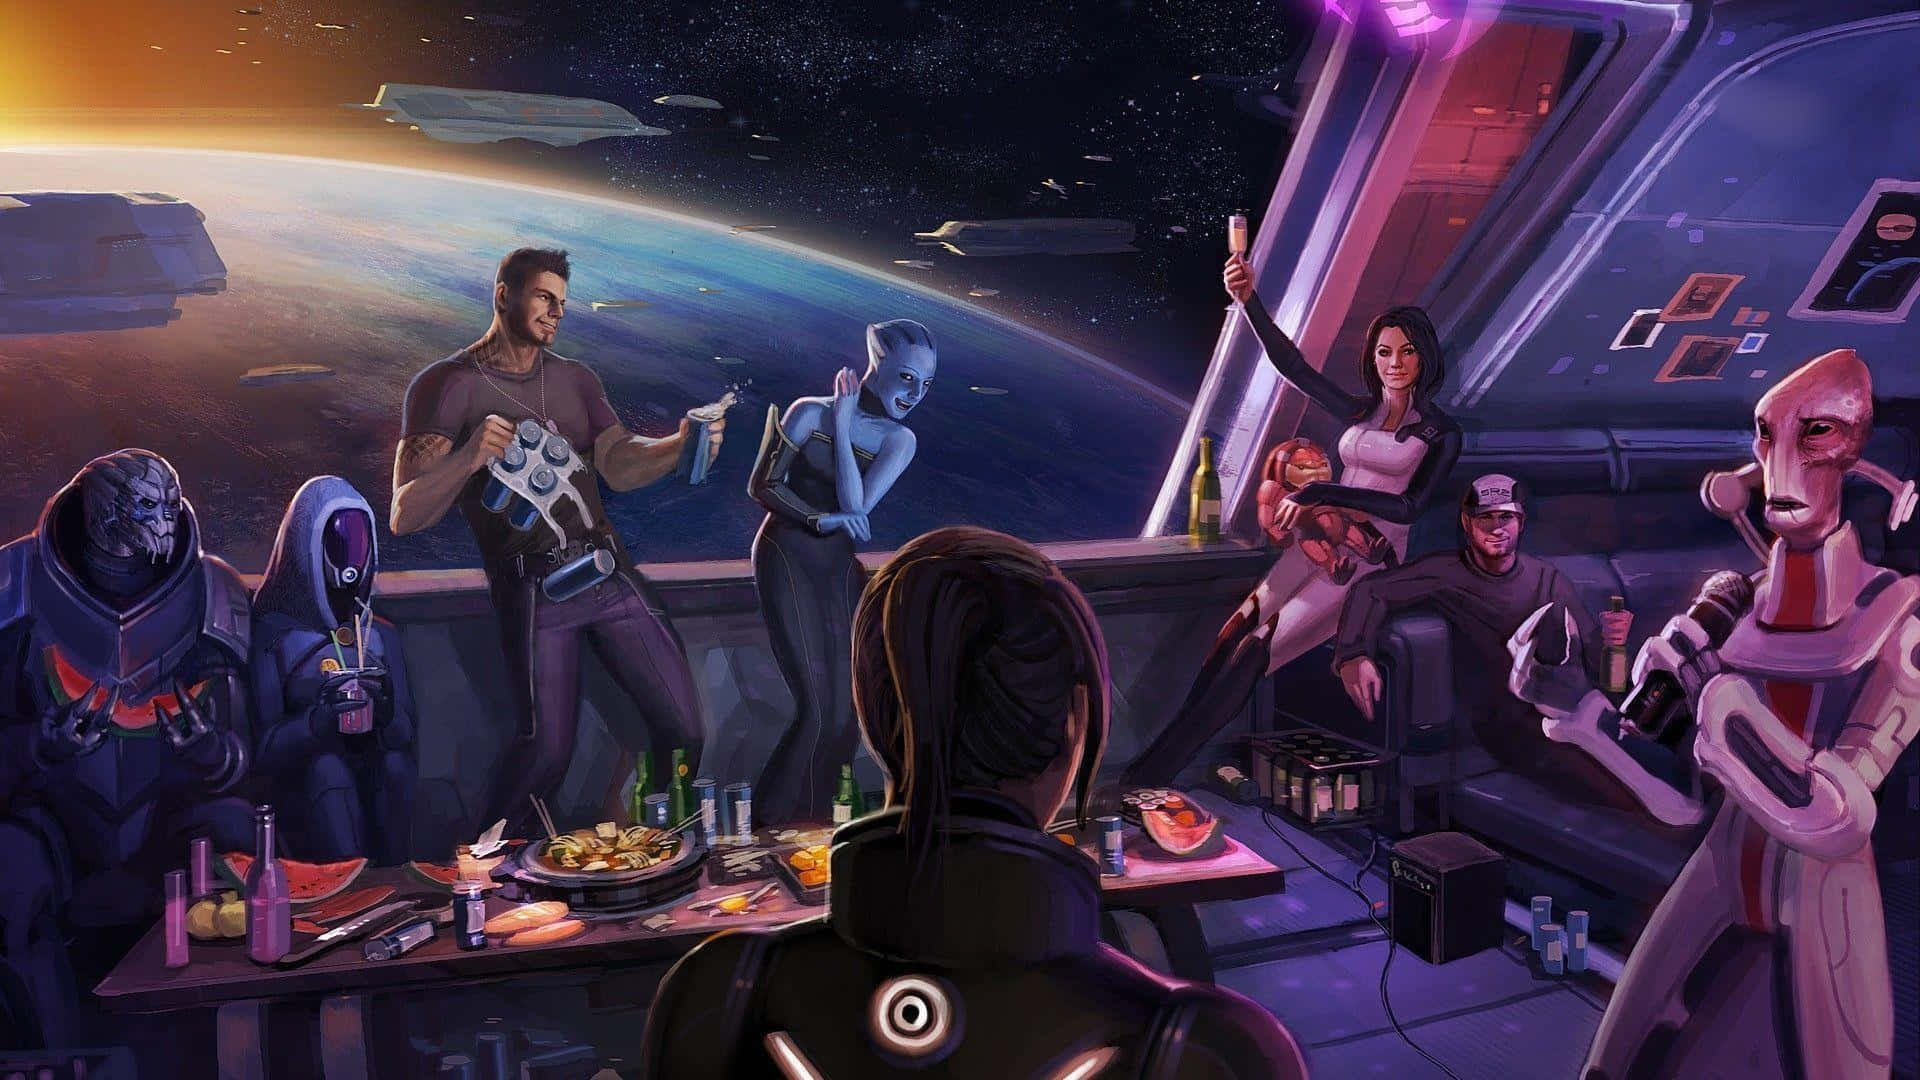 Group of Iconic Mass Effect Characters Wallpaper